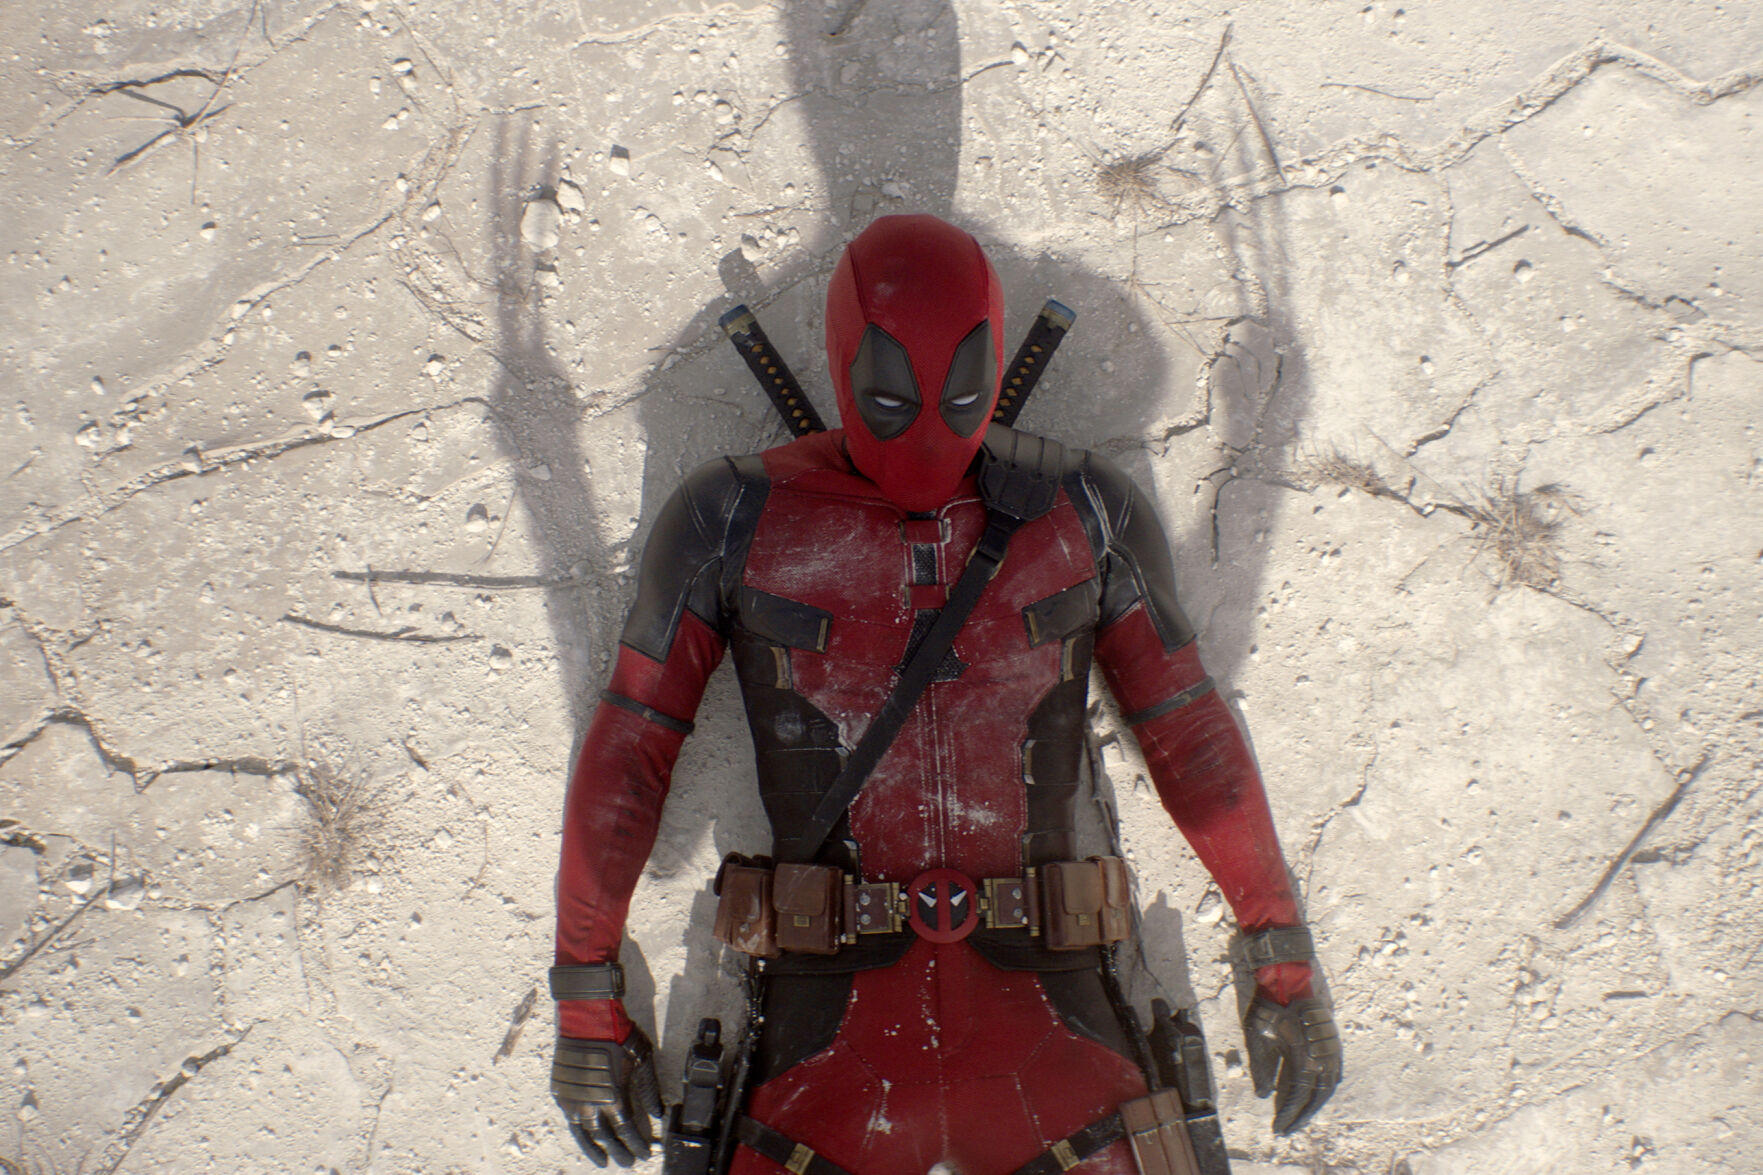 <p>This image released by 20th Century Studios/Marvel Studios shows Ryan Reynolds as Deadpool/Wade Wilson in a scene from "Deadpool & Wolverine." (20th Century Studios/Marvel Studios via AP)</p>   PHOTO CREDIT: 20th Century Studios/Marvel Studios via AP